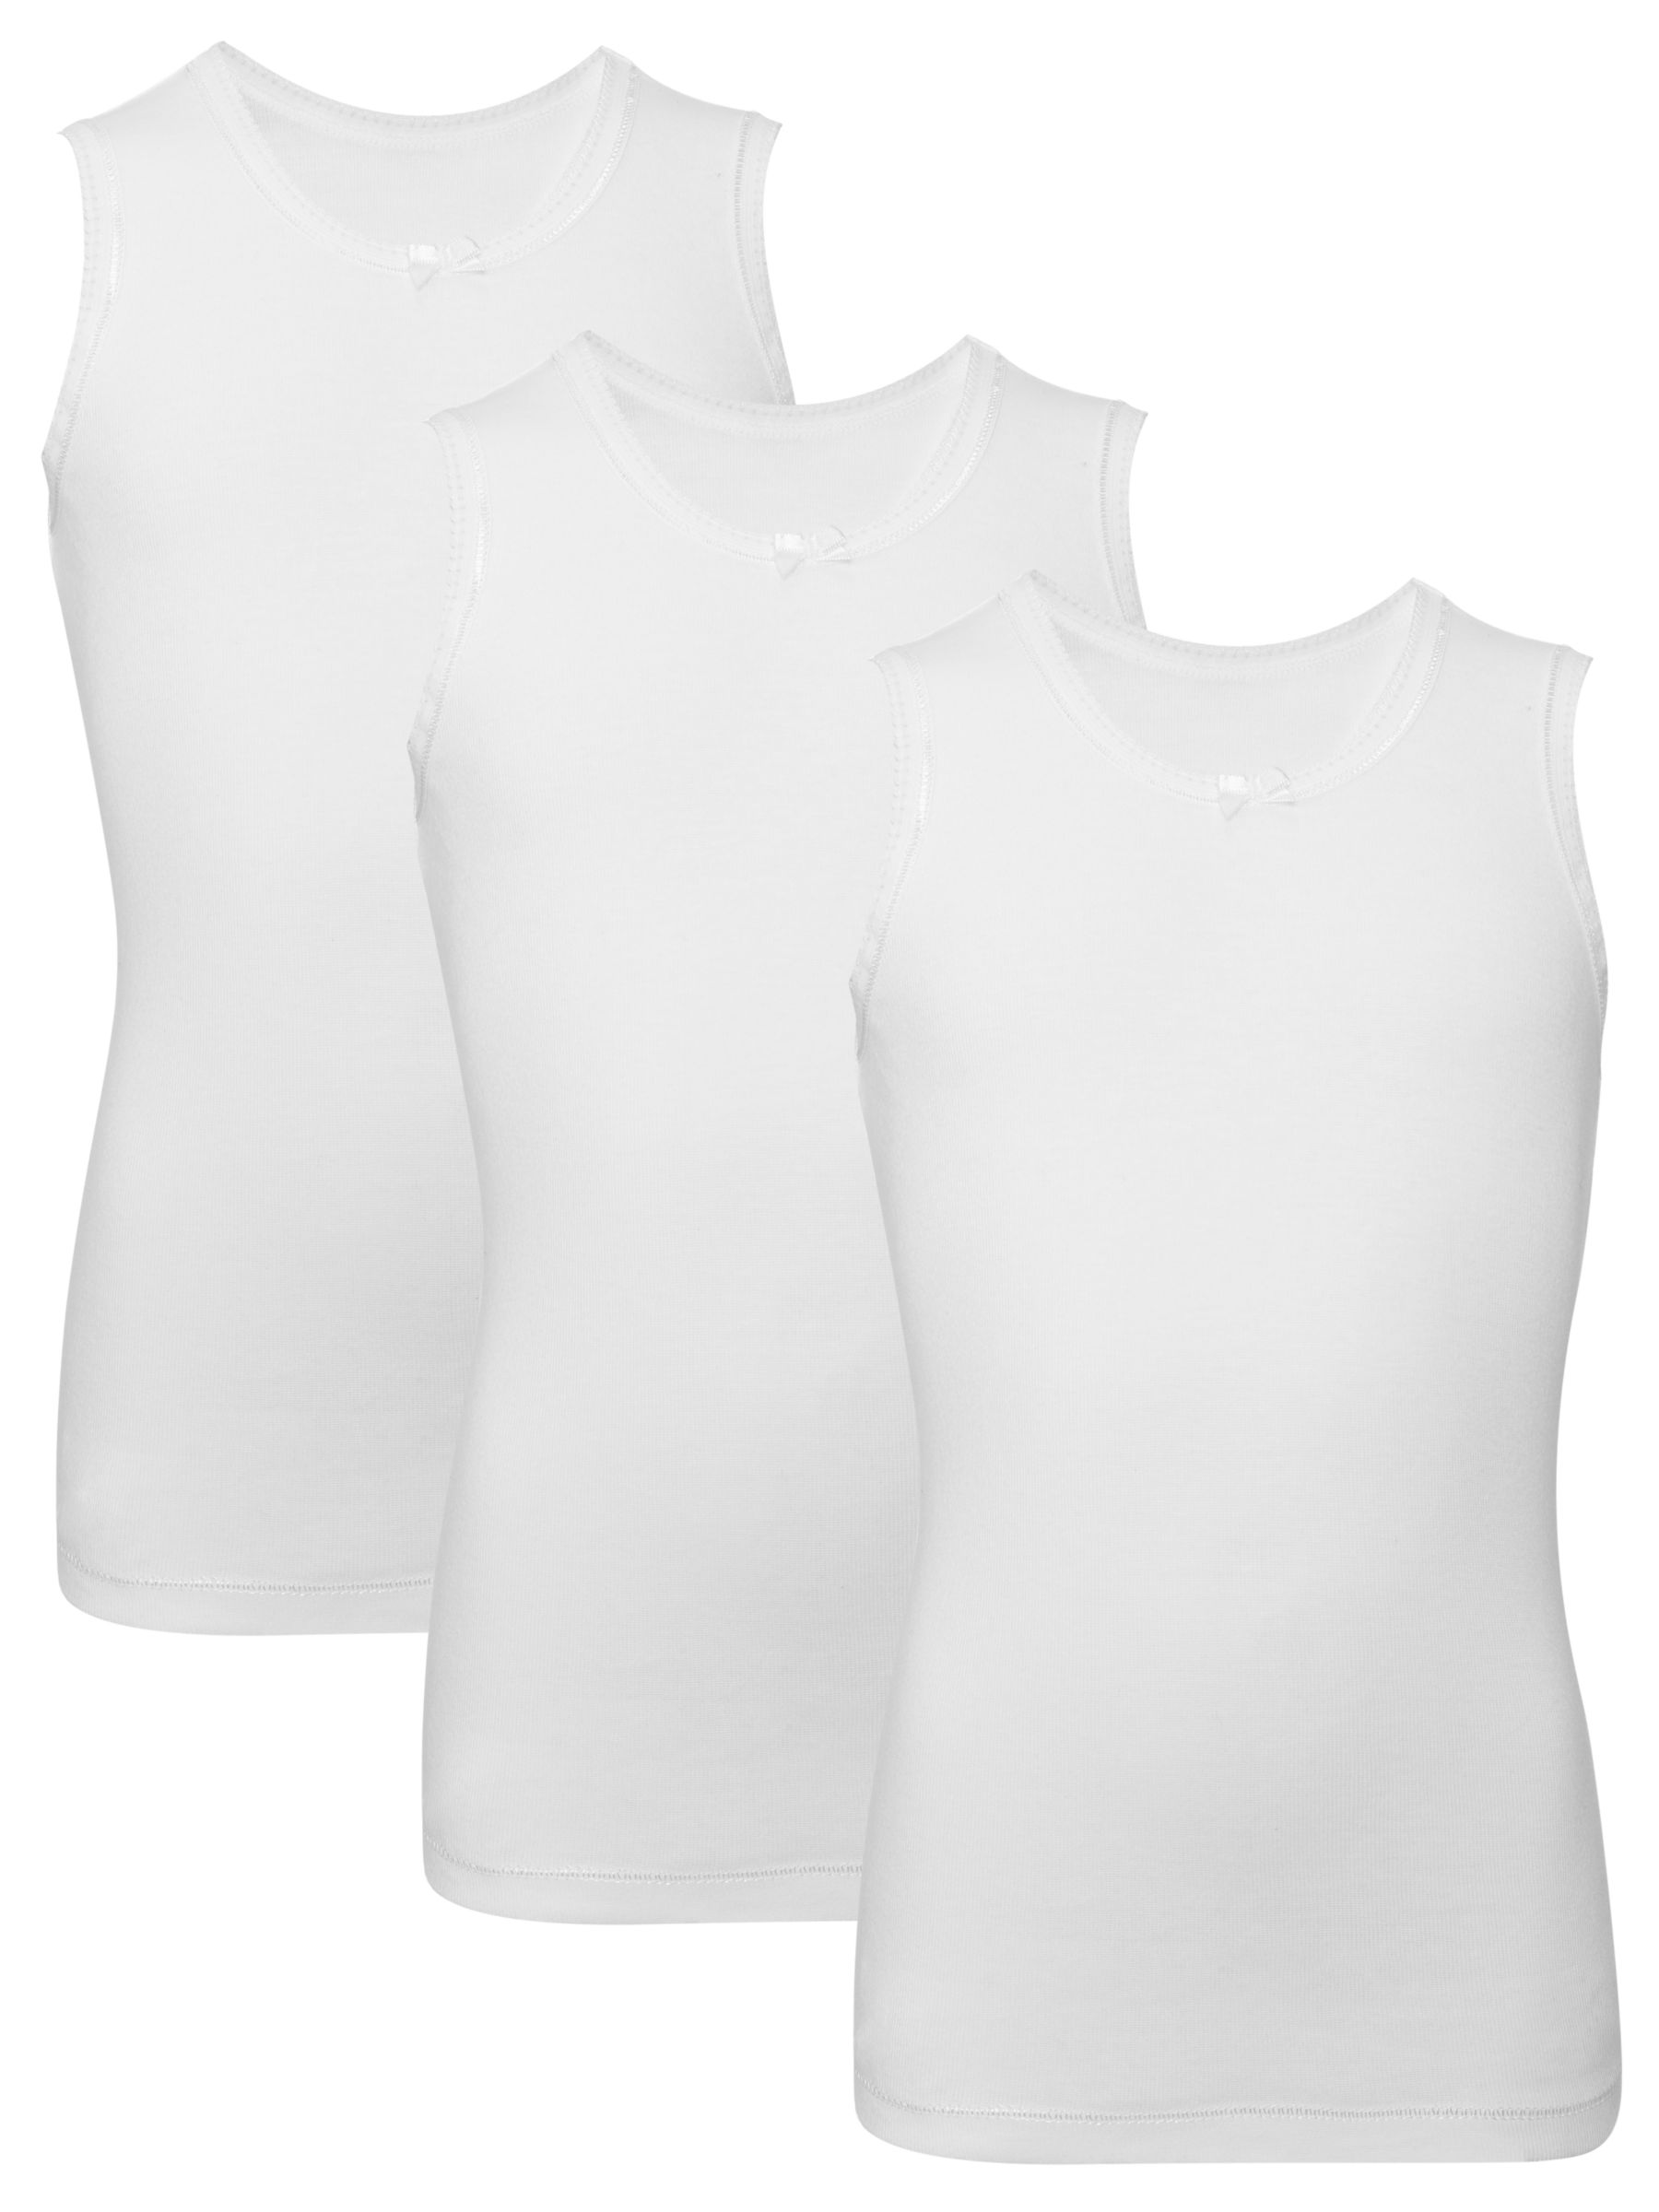 John Lewis & Partners Girl Cotton Vests, Pack of 3, White